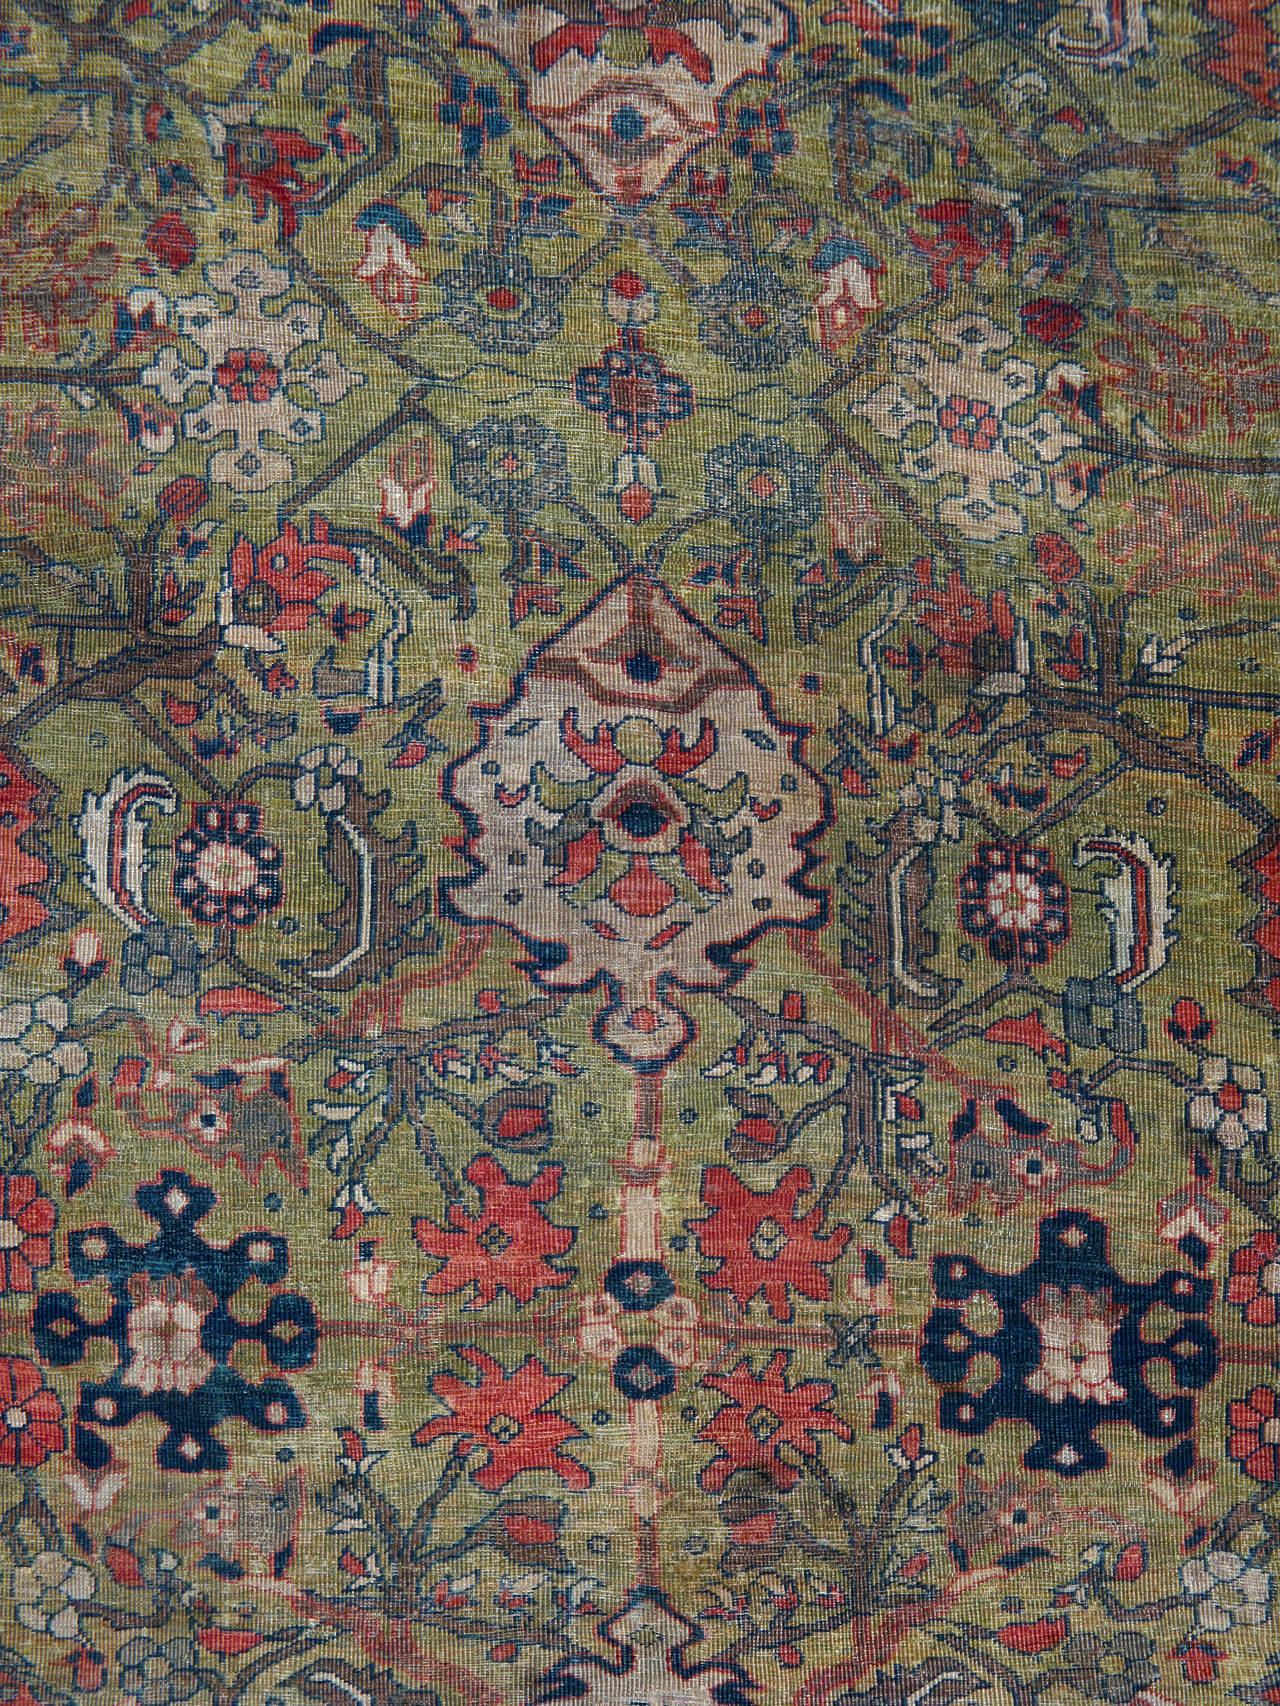 An antique distressed Persian Sultanabad carpet from the turn of the 20th century in shades of olive green and rust red.